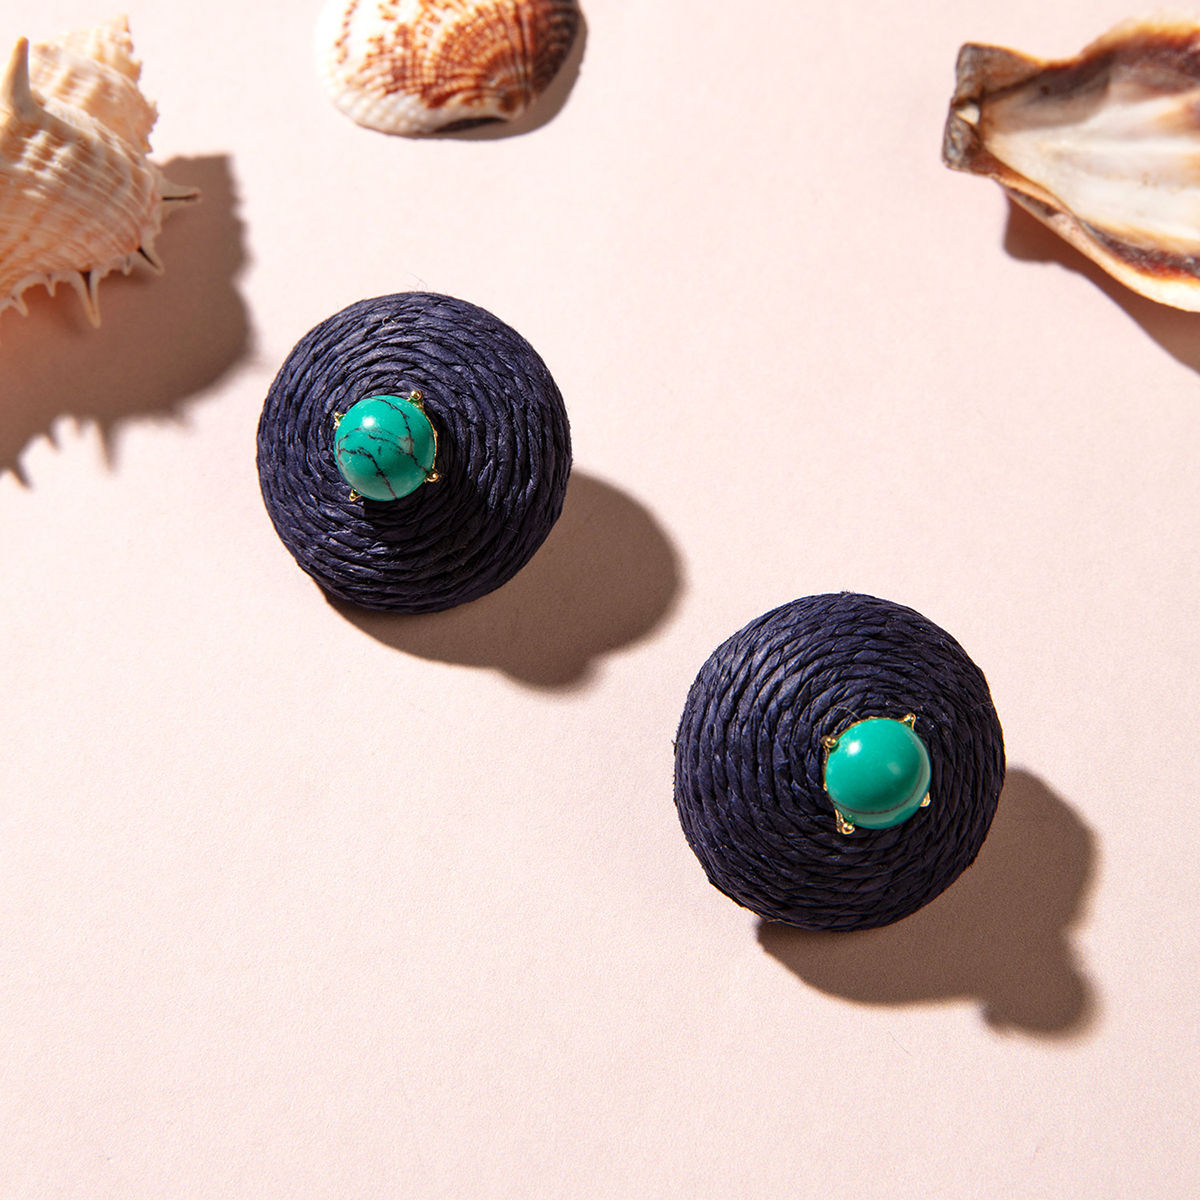 Dainty Black Textured Stud Earrings Embellished with Turquoise Stone